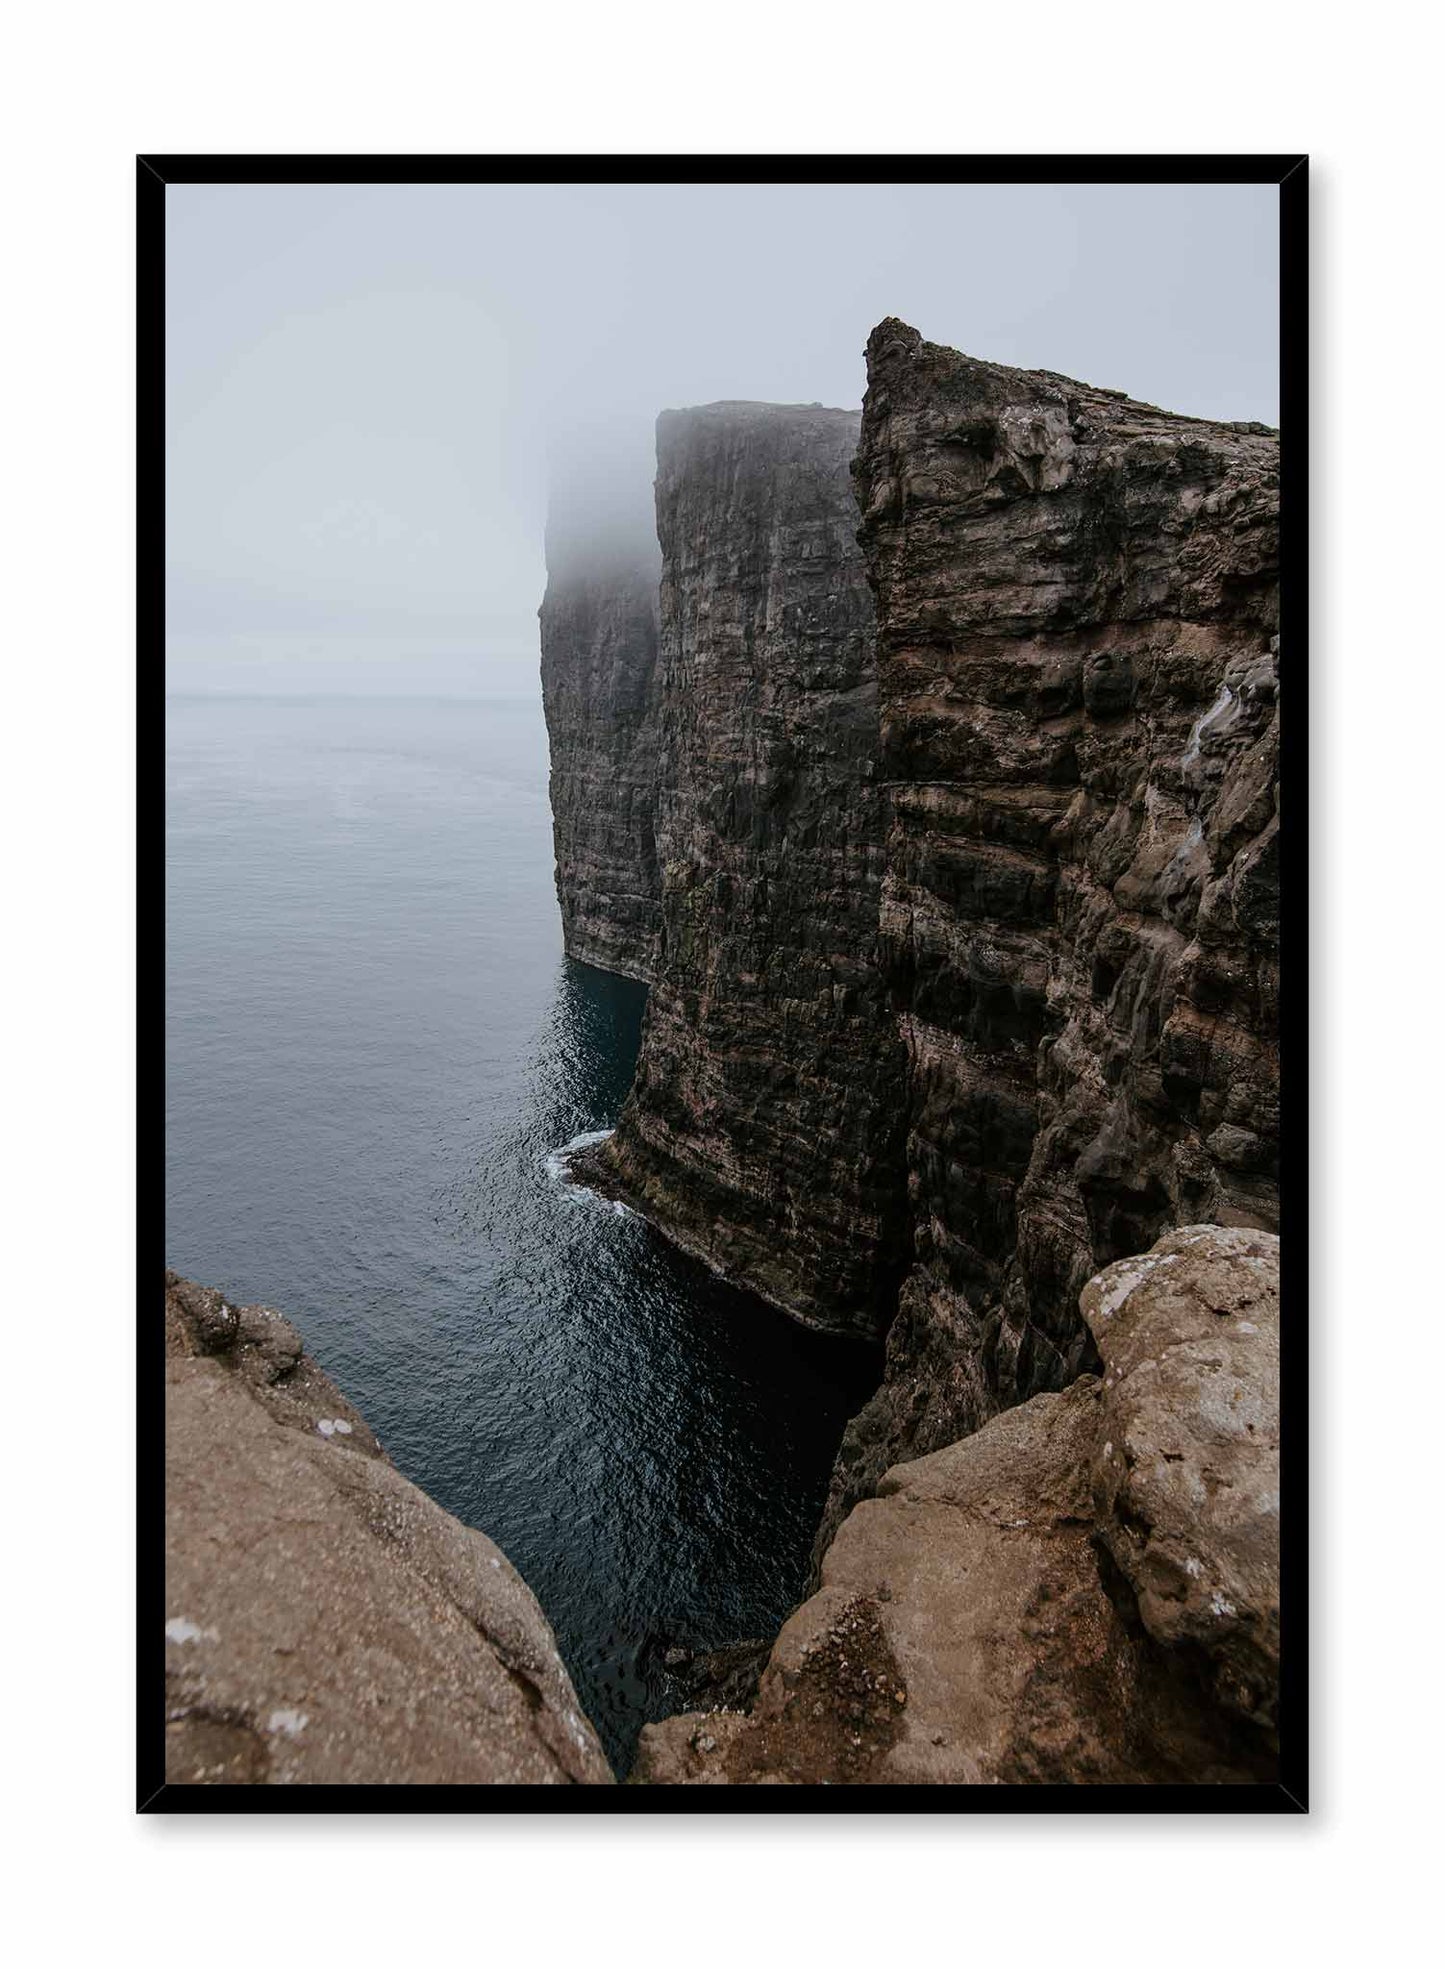 Steep' is a landscape photography poster by Opposite Wall of a rocky cliff overlooking a vast body of water and bathing in cloudy mist.